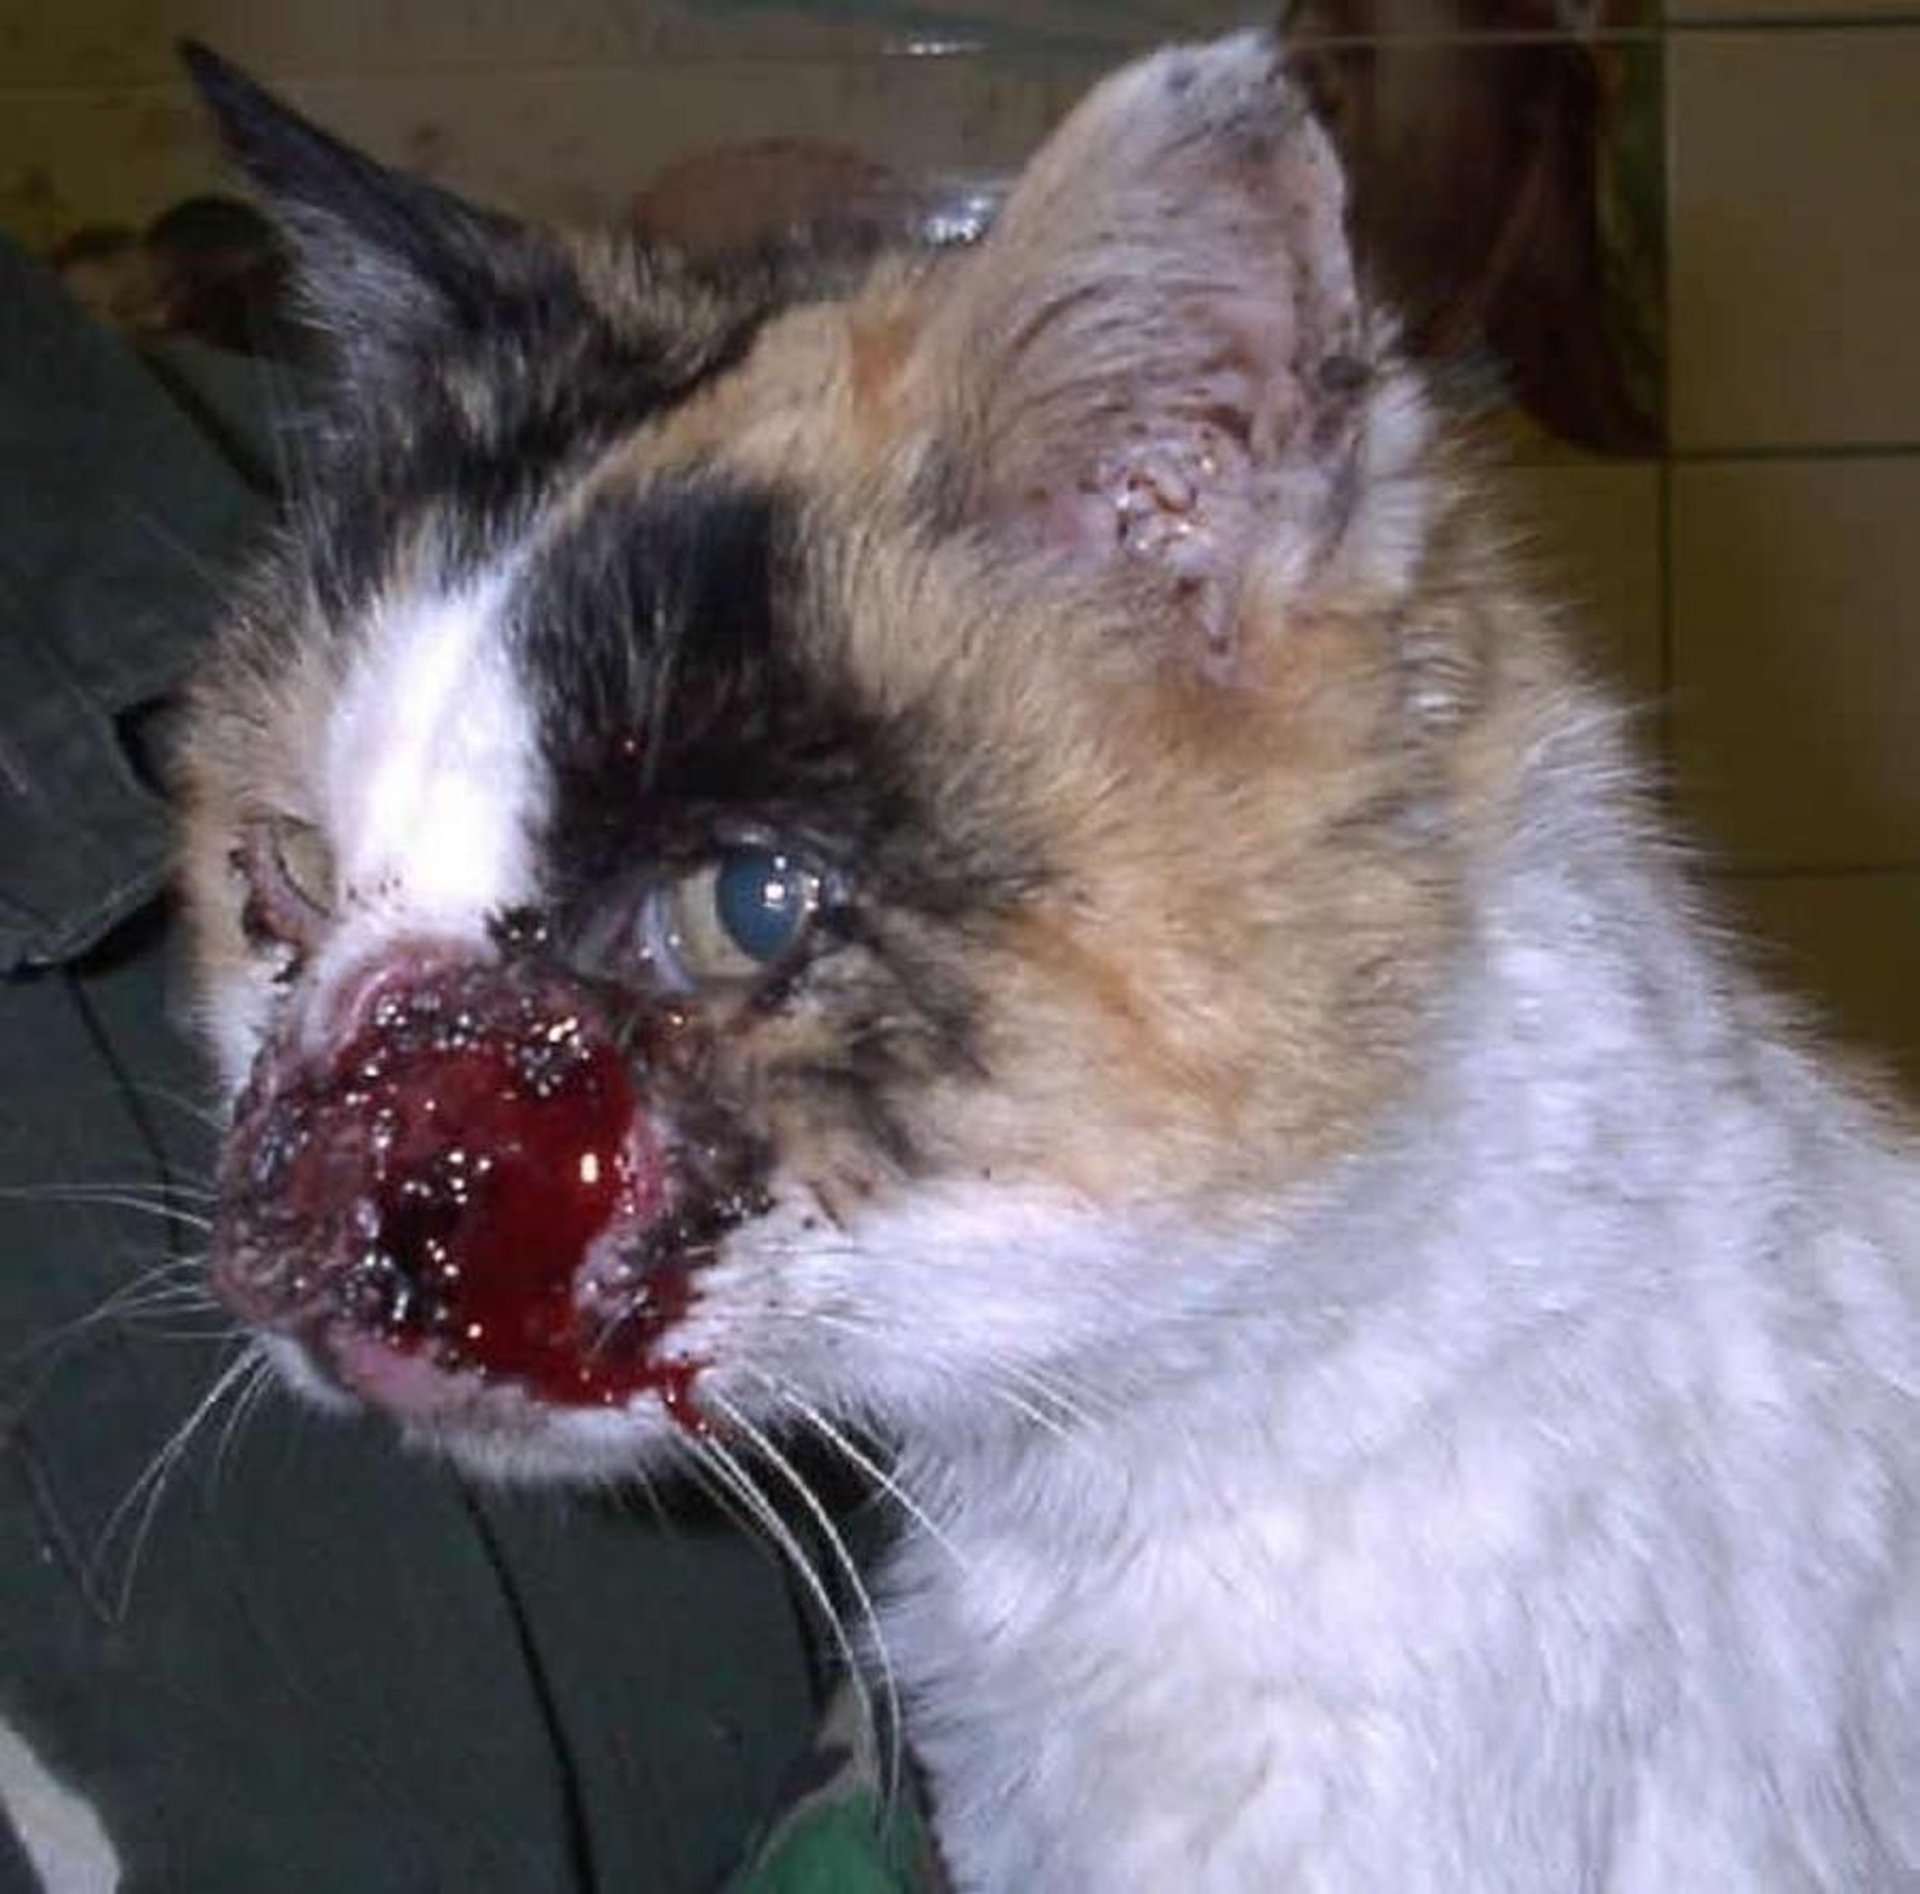 Squamous cell carcinoma with destruction and ulceration of the nose, Calico cat